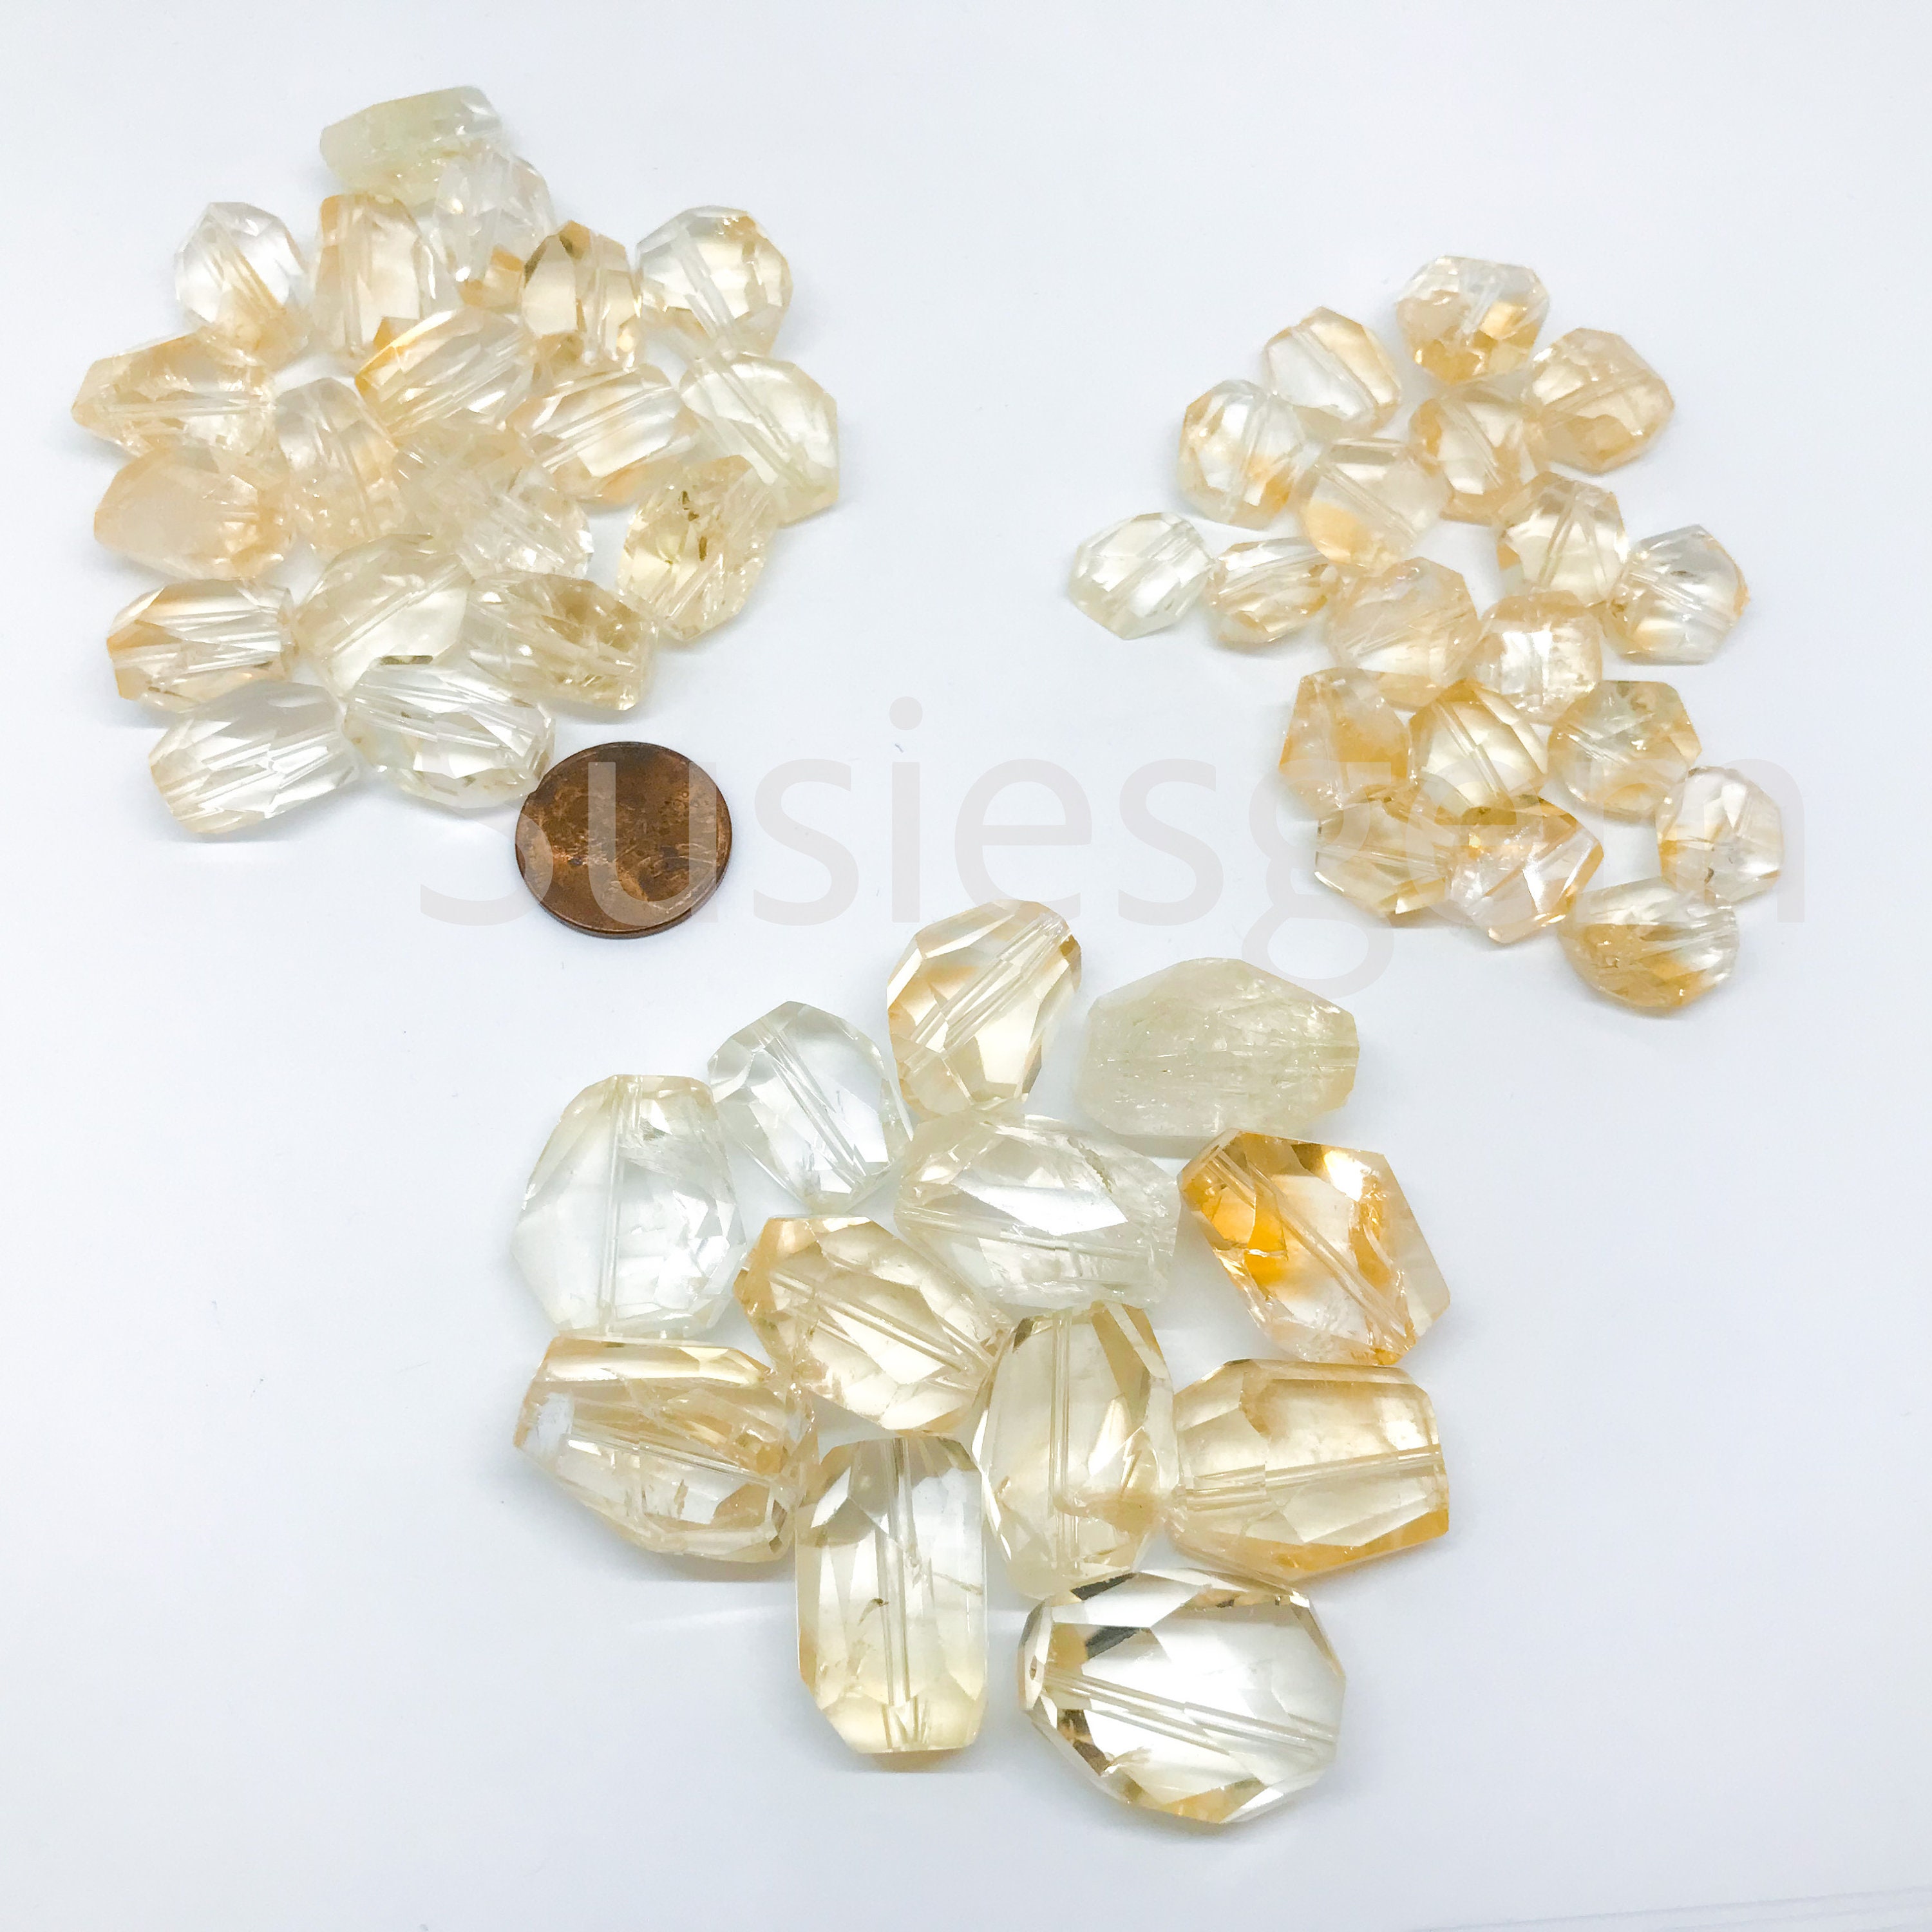 Genuine Citrine Faceted Nuggets Yellow Crystal Gemstone - Etsy